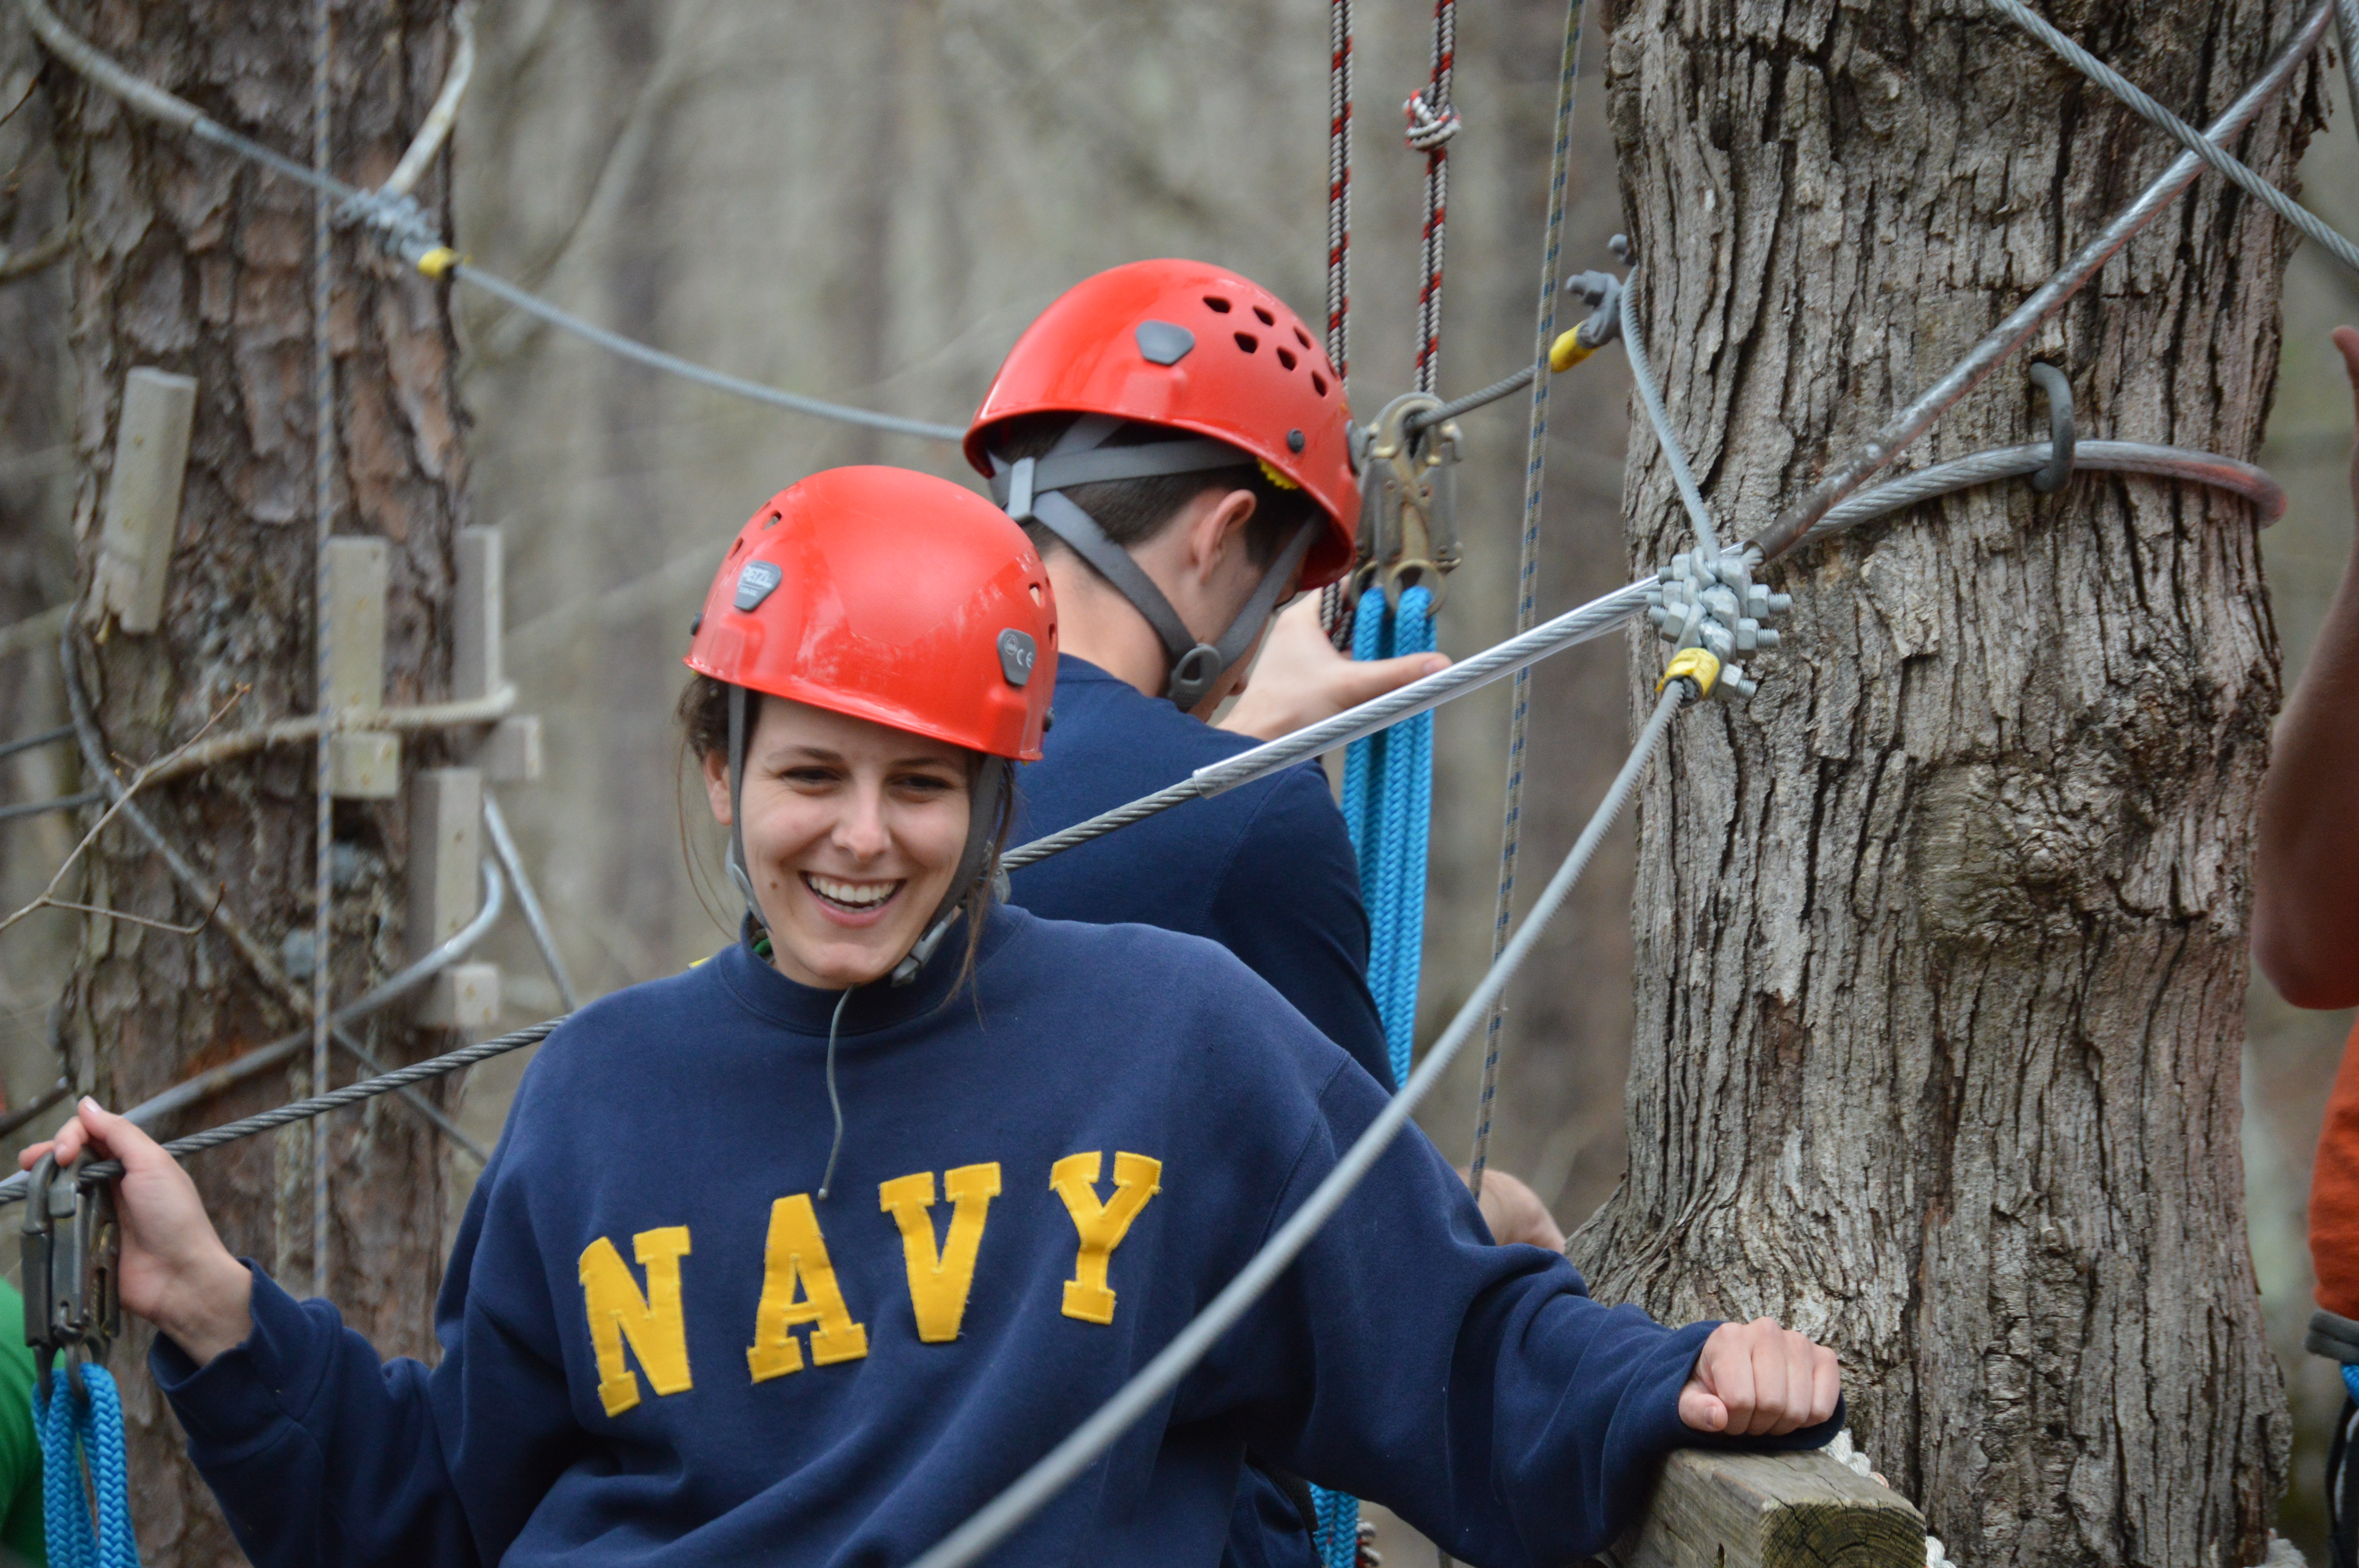 Participant smiling on high ropes course